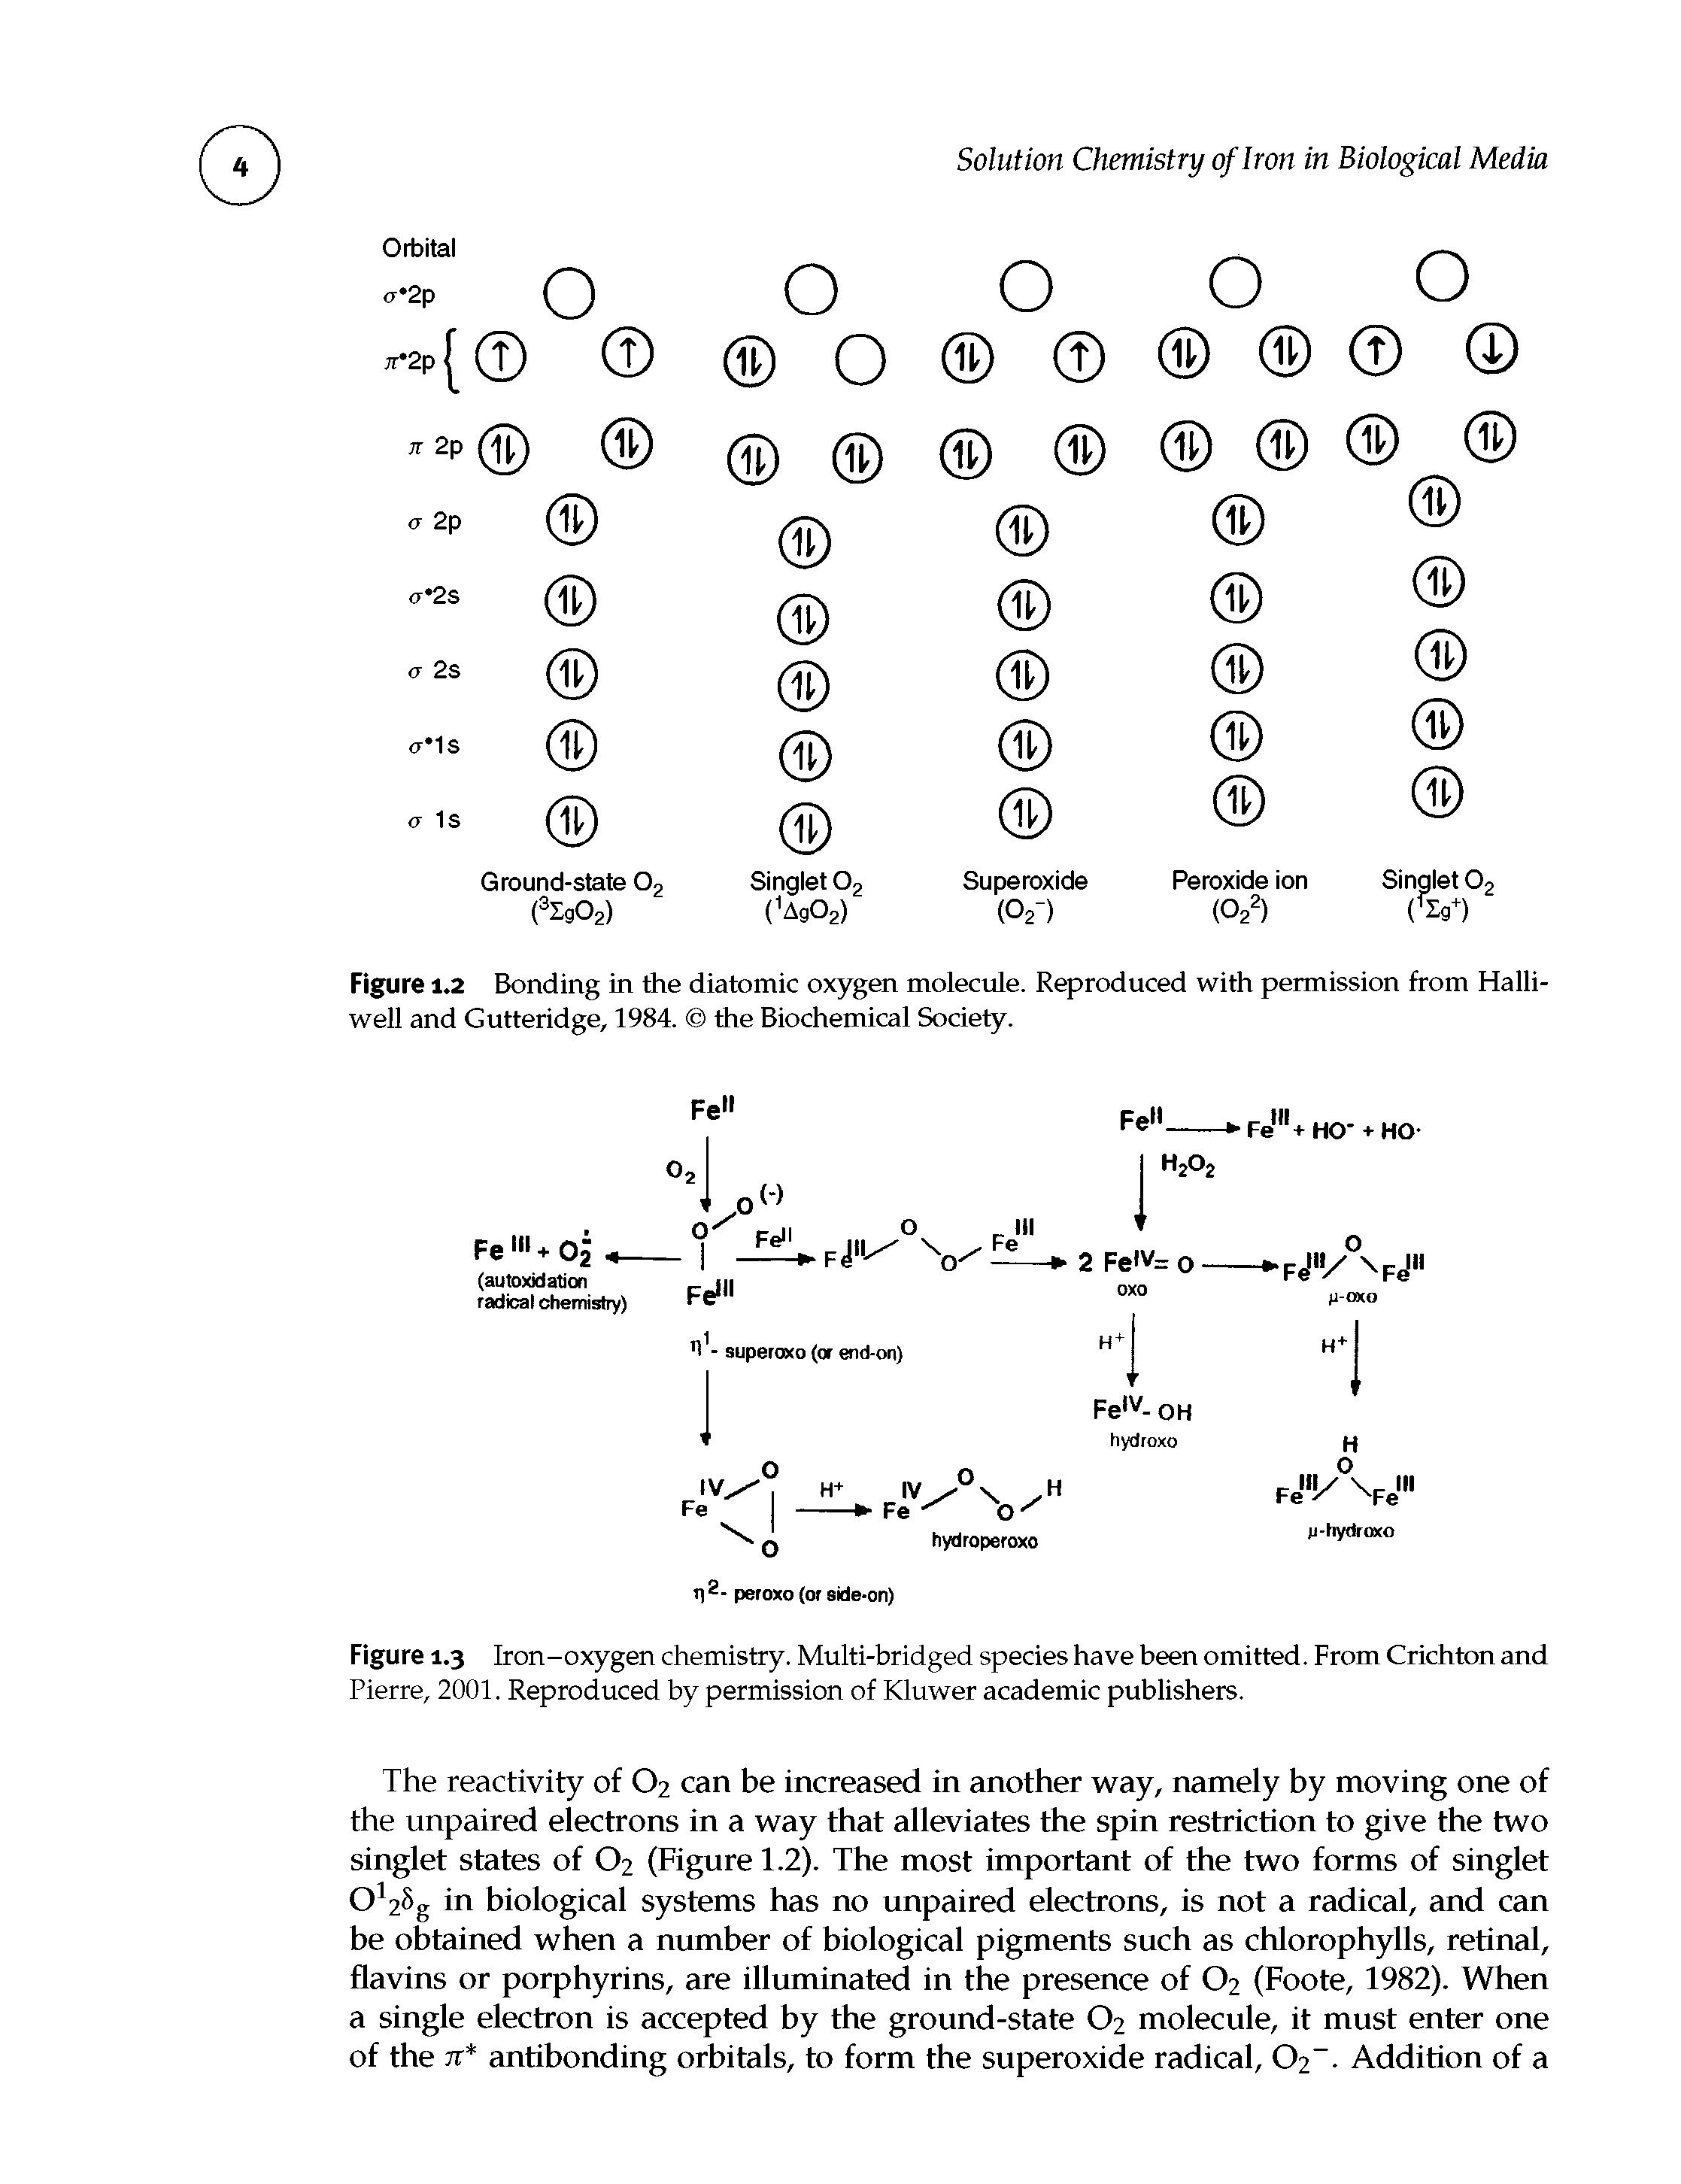 Figure 1.3 Iron-oxygen chemistry. Multi-bridged species have been omitted. From Crichton and Pierre, 2001. Reproduced by permission of Kluwer academic publishers.